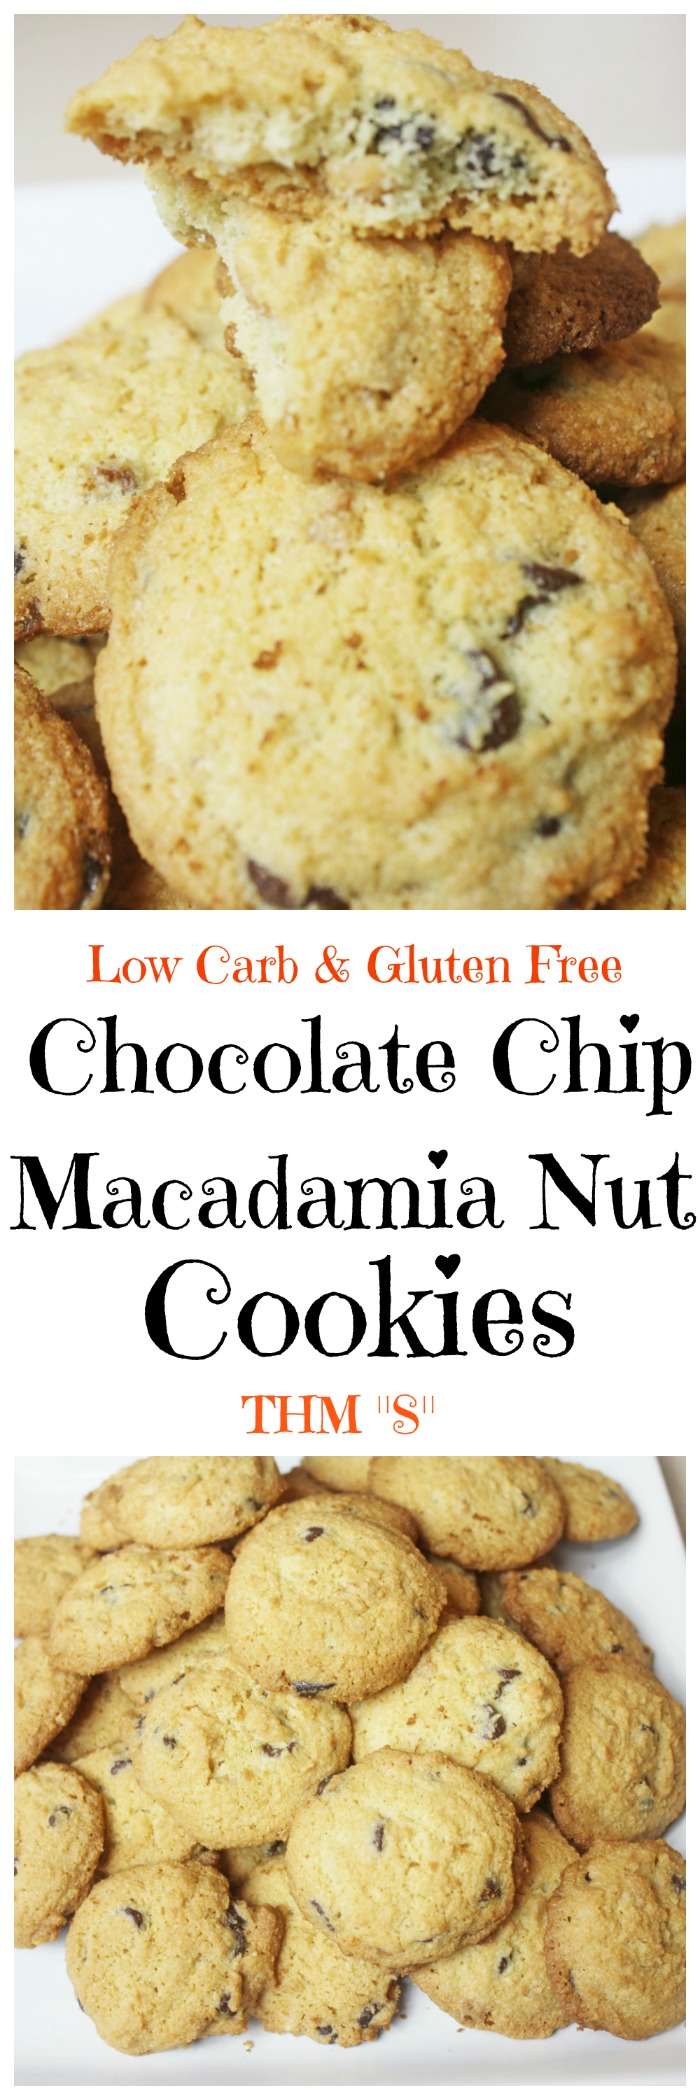 Chocolate Chip Macadamia Nut Cookies || Low Carb Cookes, Gluten Free, Trim Healthy Mama Cookies, Sugar Free